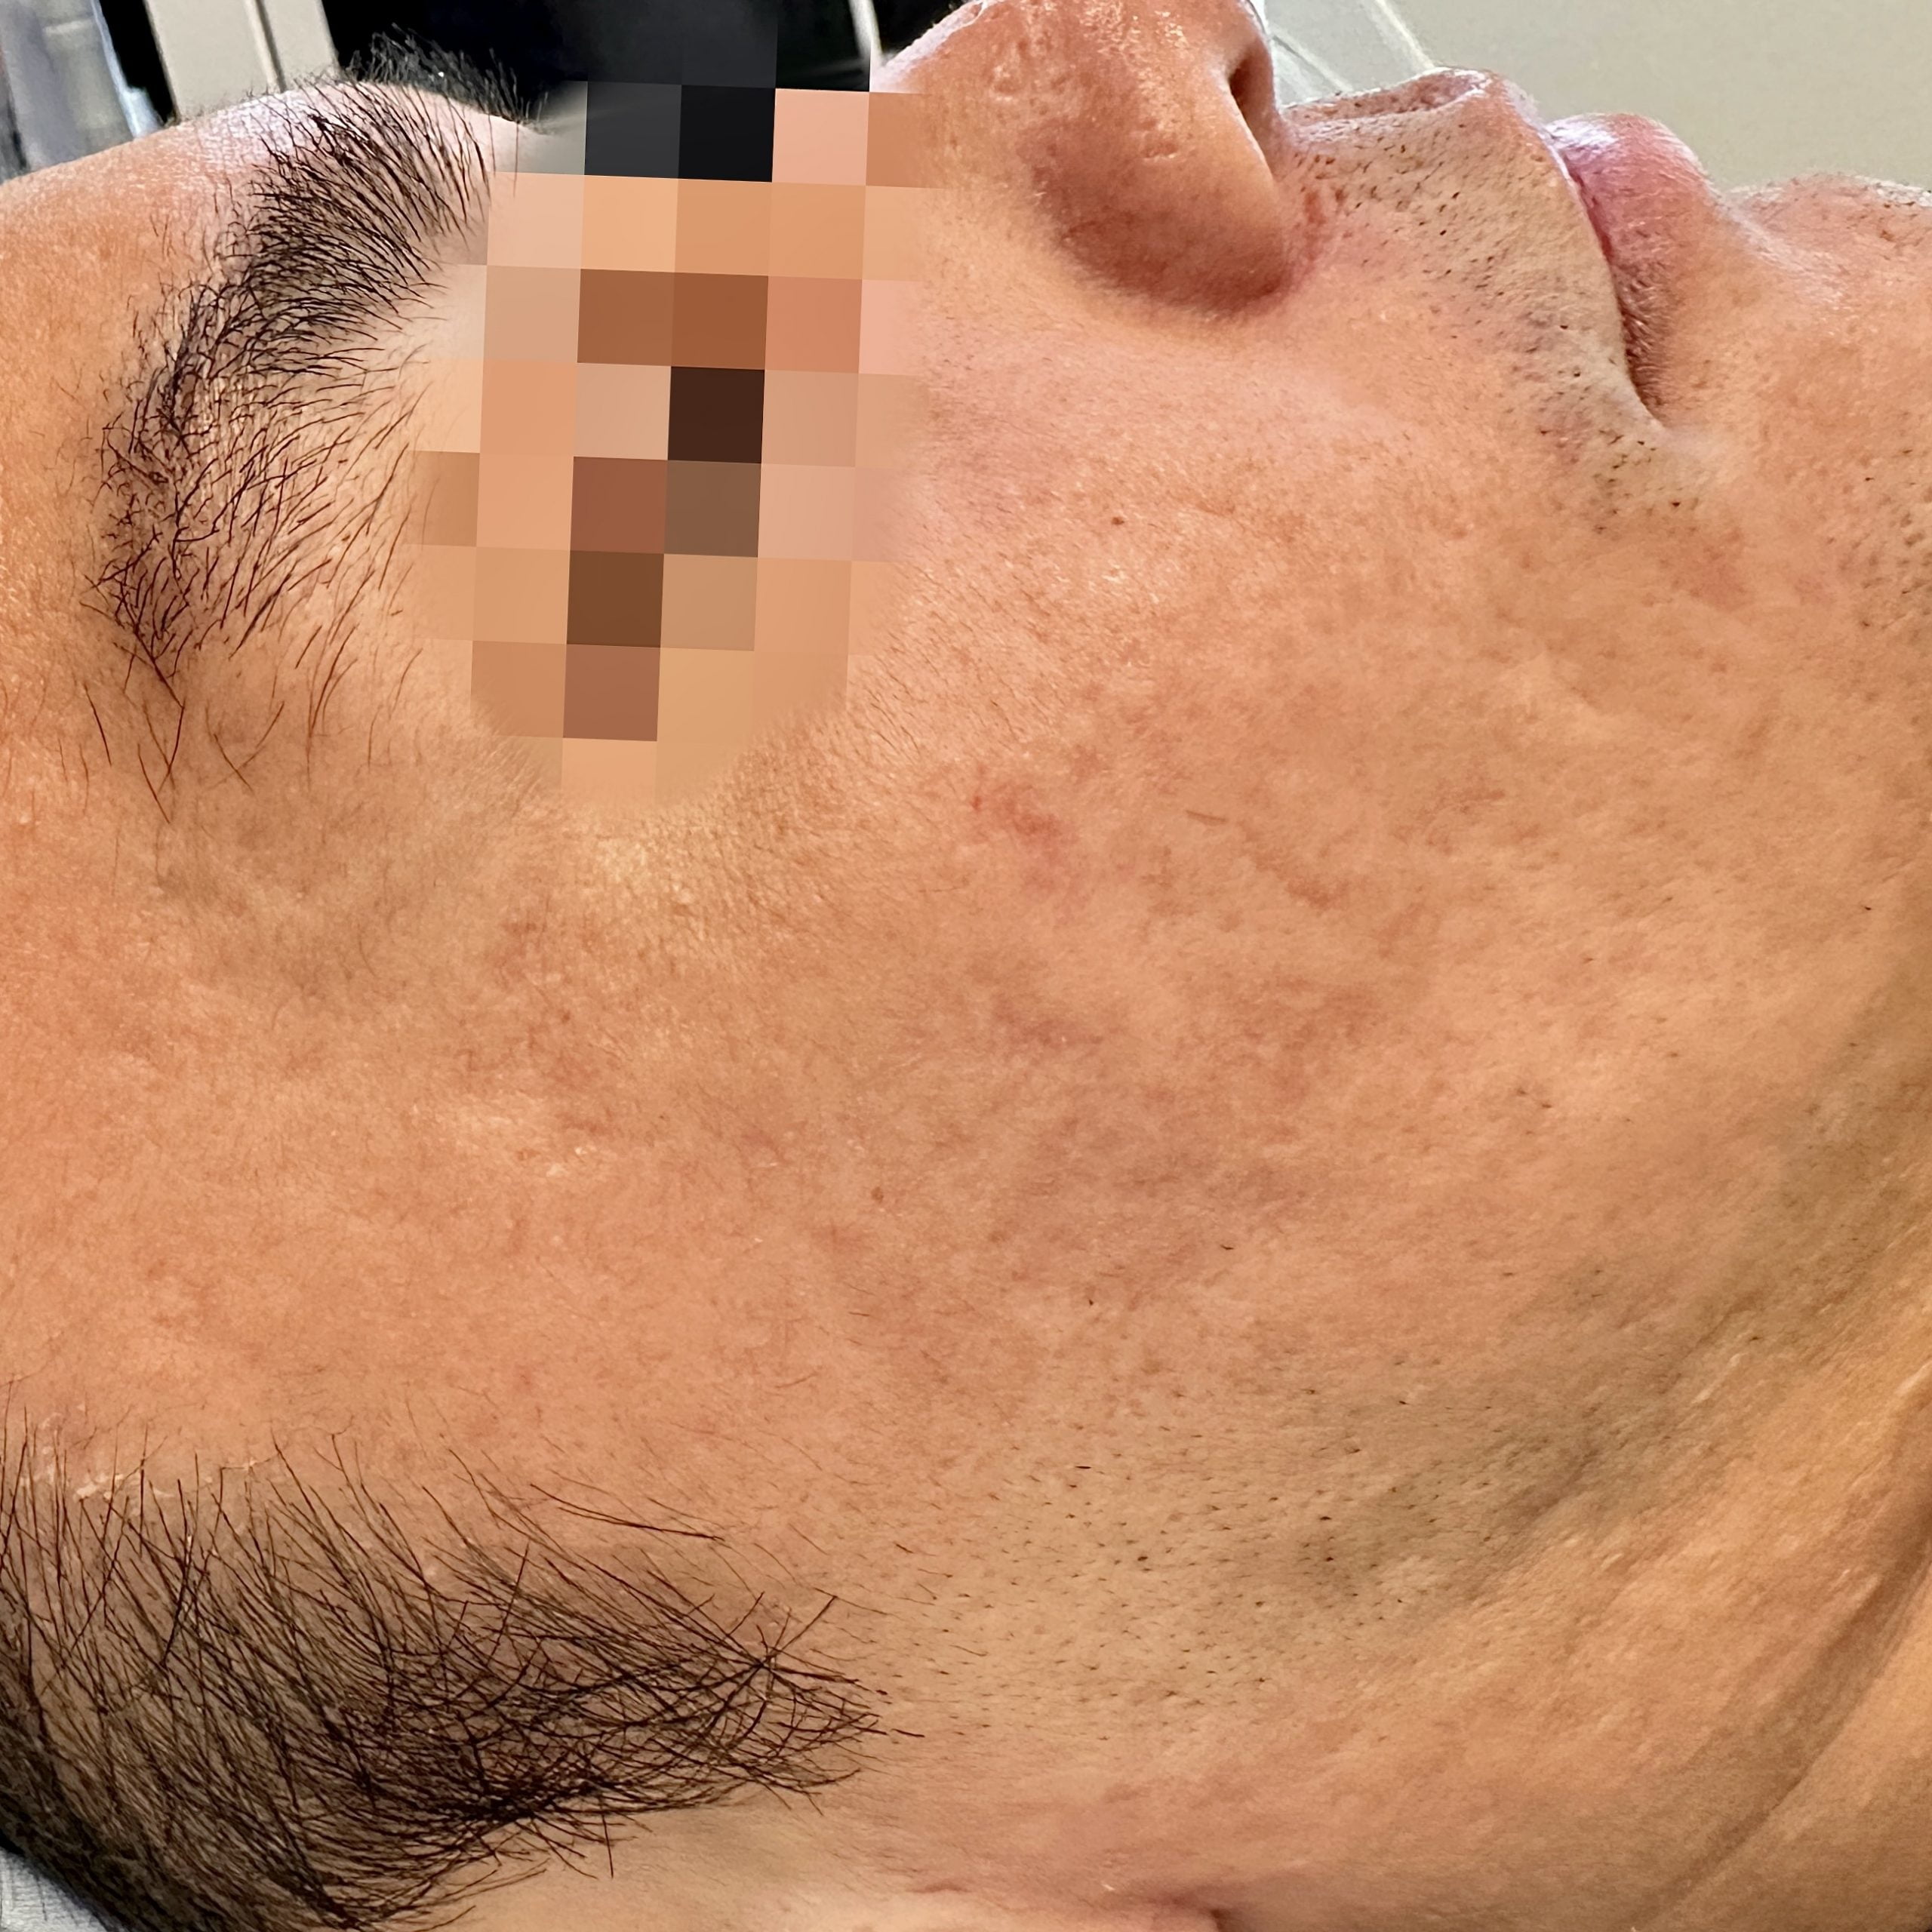 Client after 3 sessions of Venus Viva MD acne scar resurfacing.